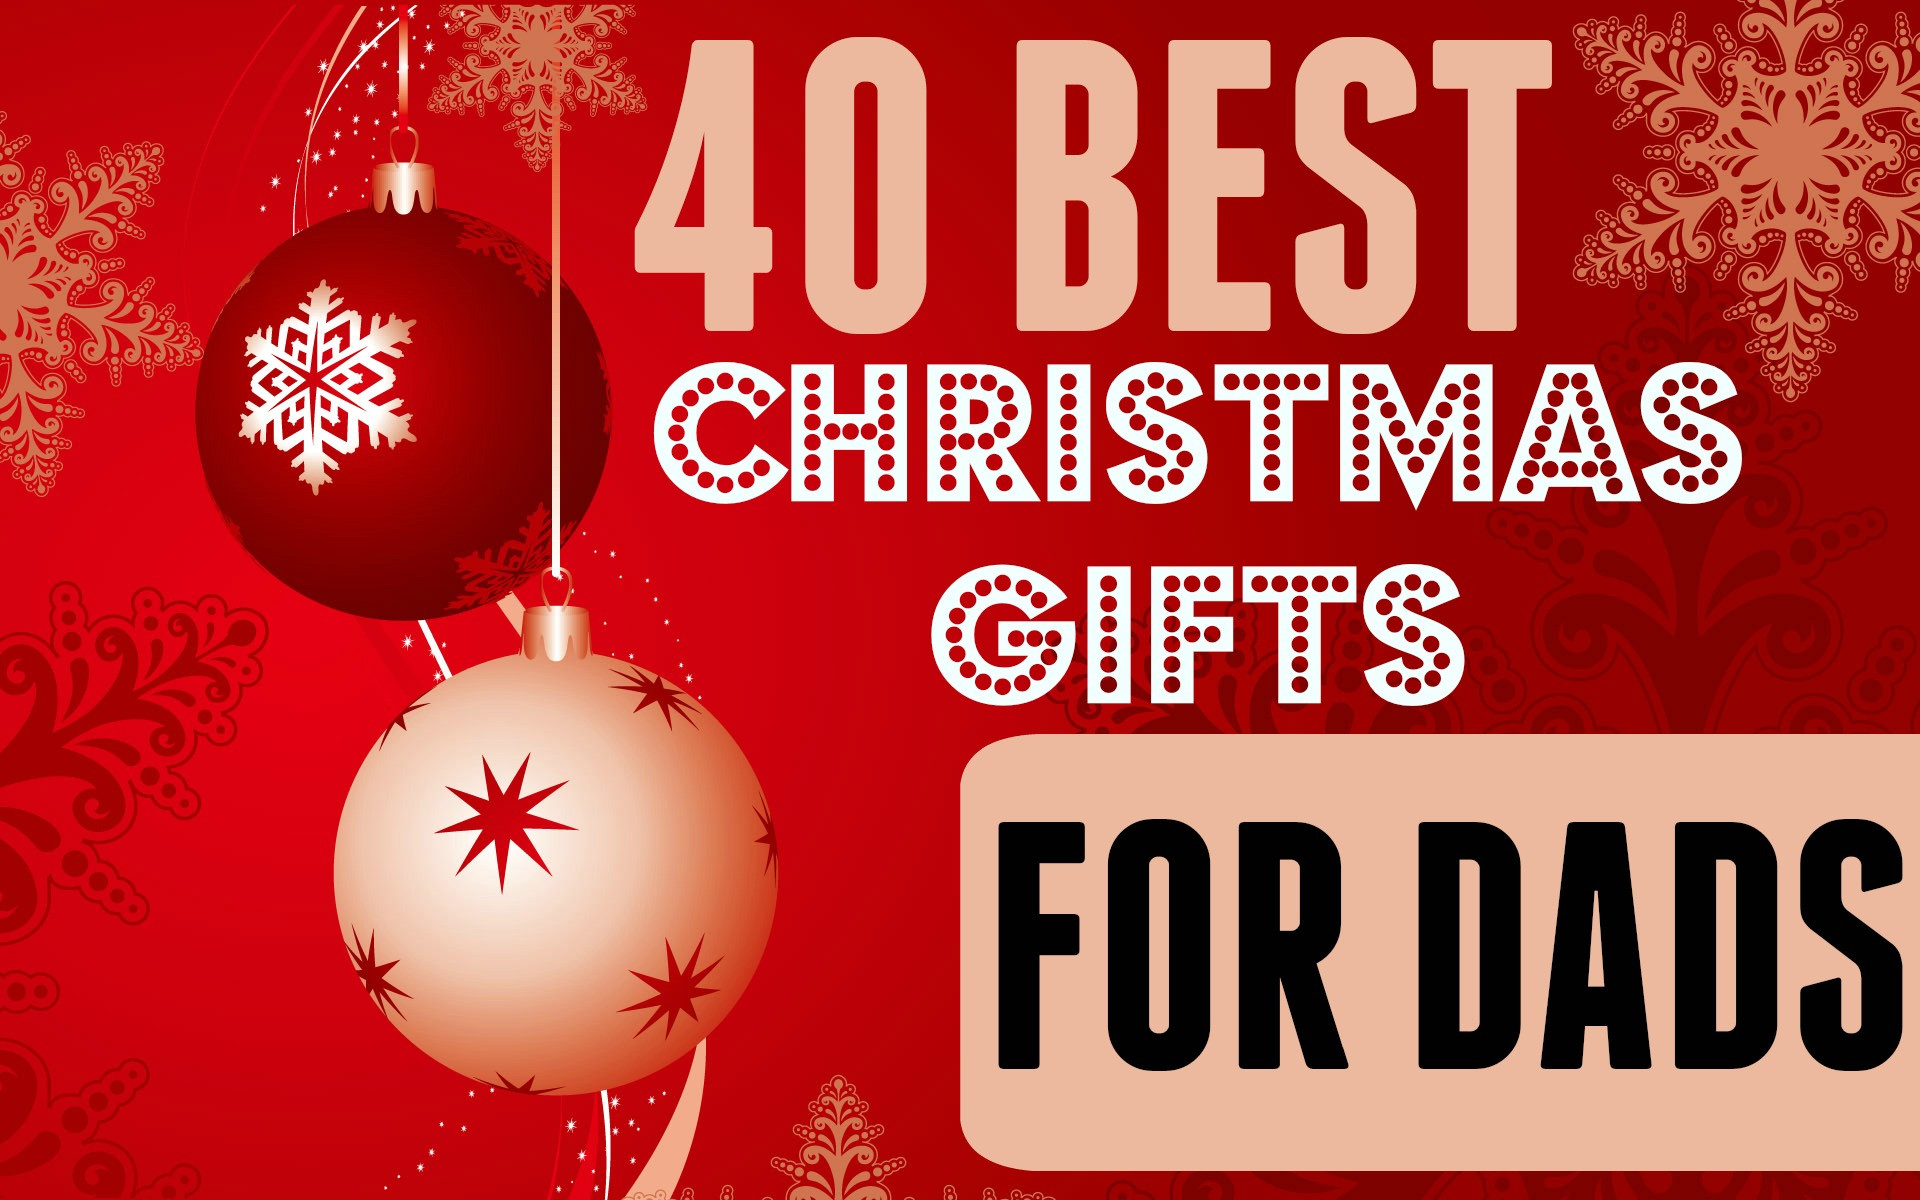 Holiday Gift Ideas For Dad
 40 Best Christmas Gifts for Dads 31 40 Mocha Dad